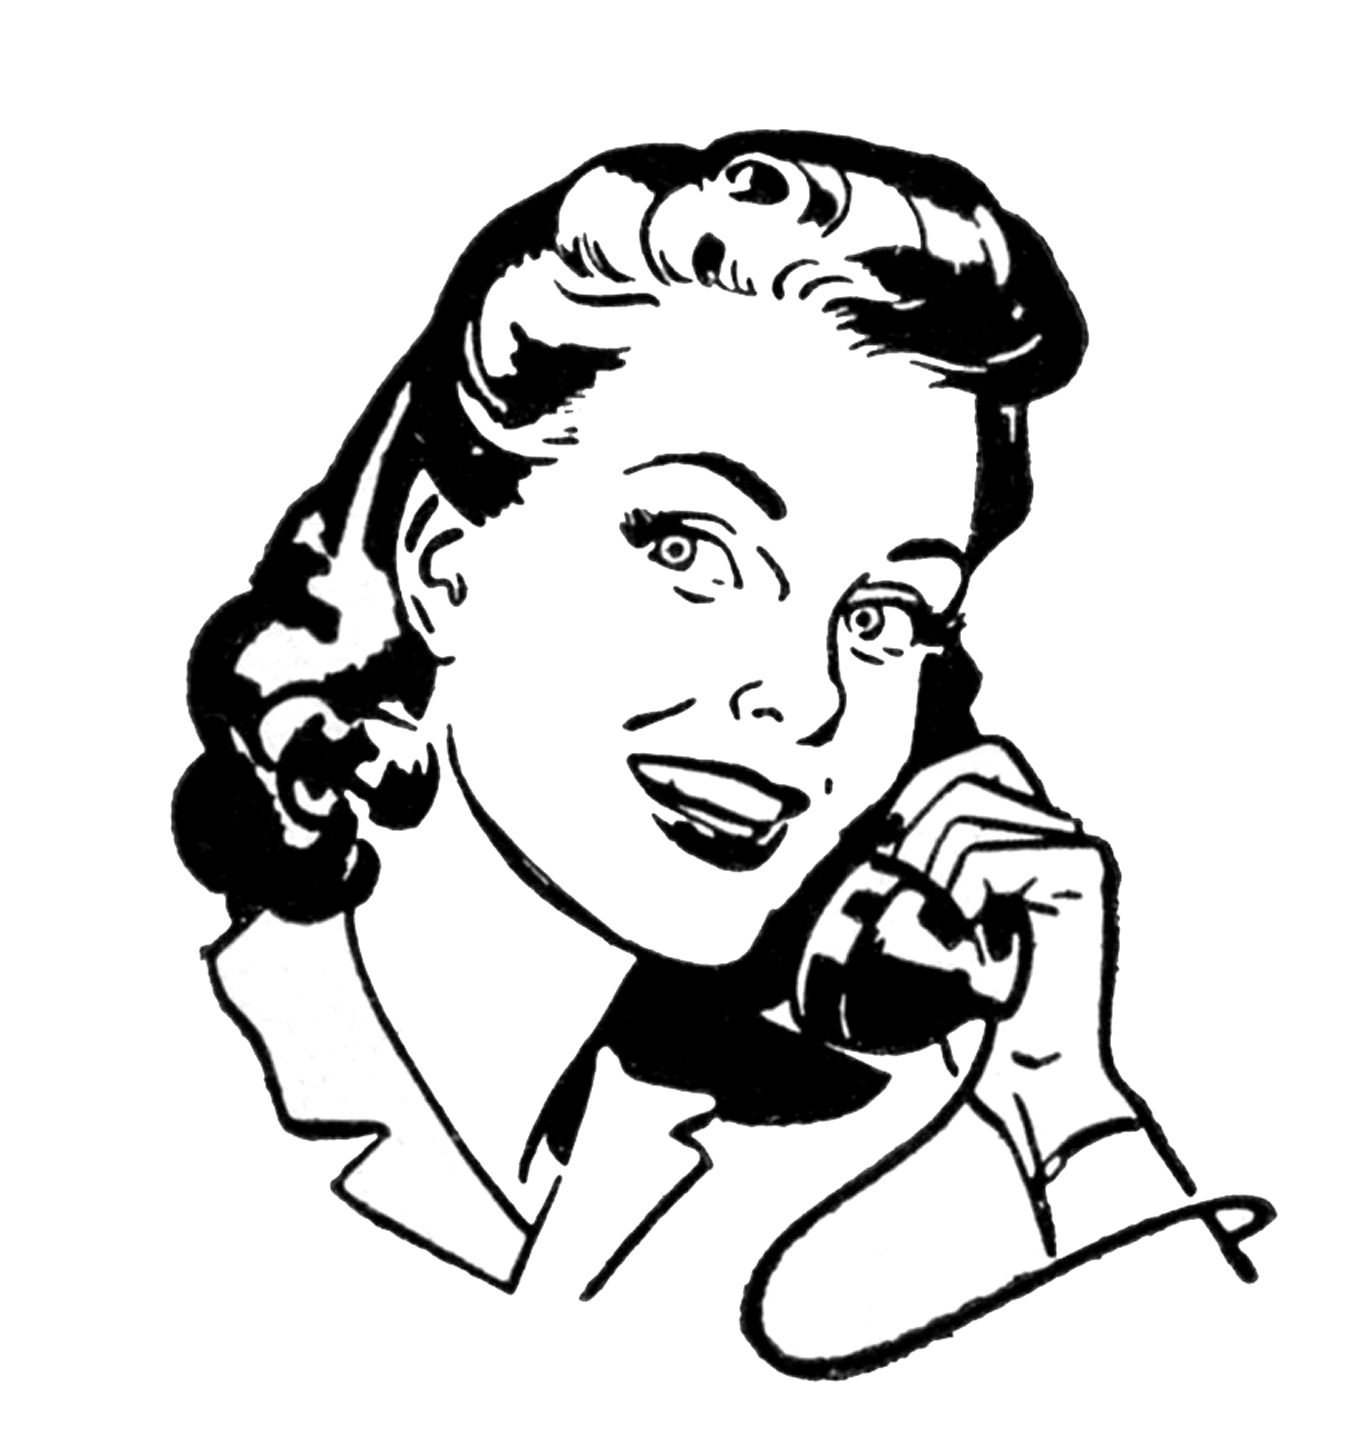 woman on phone clipart - photo #45